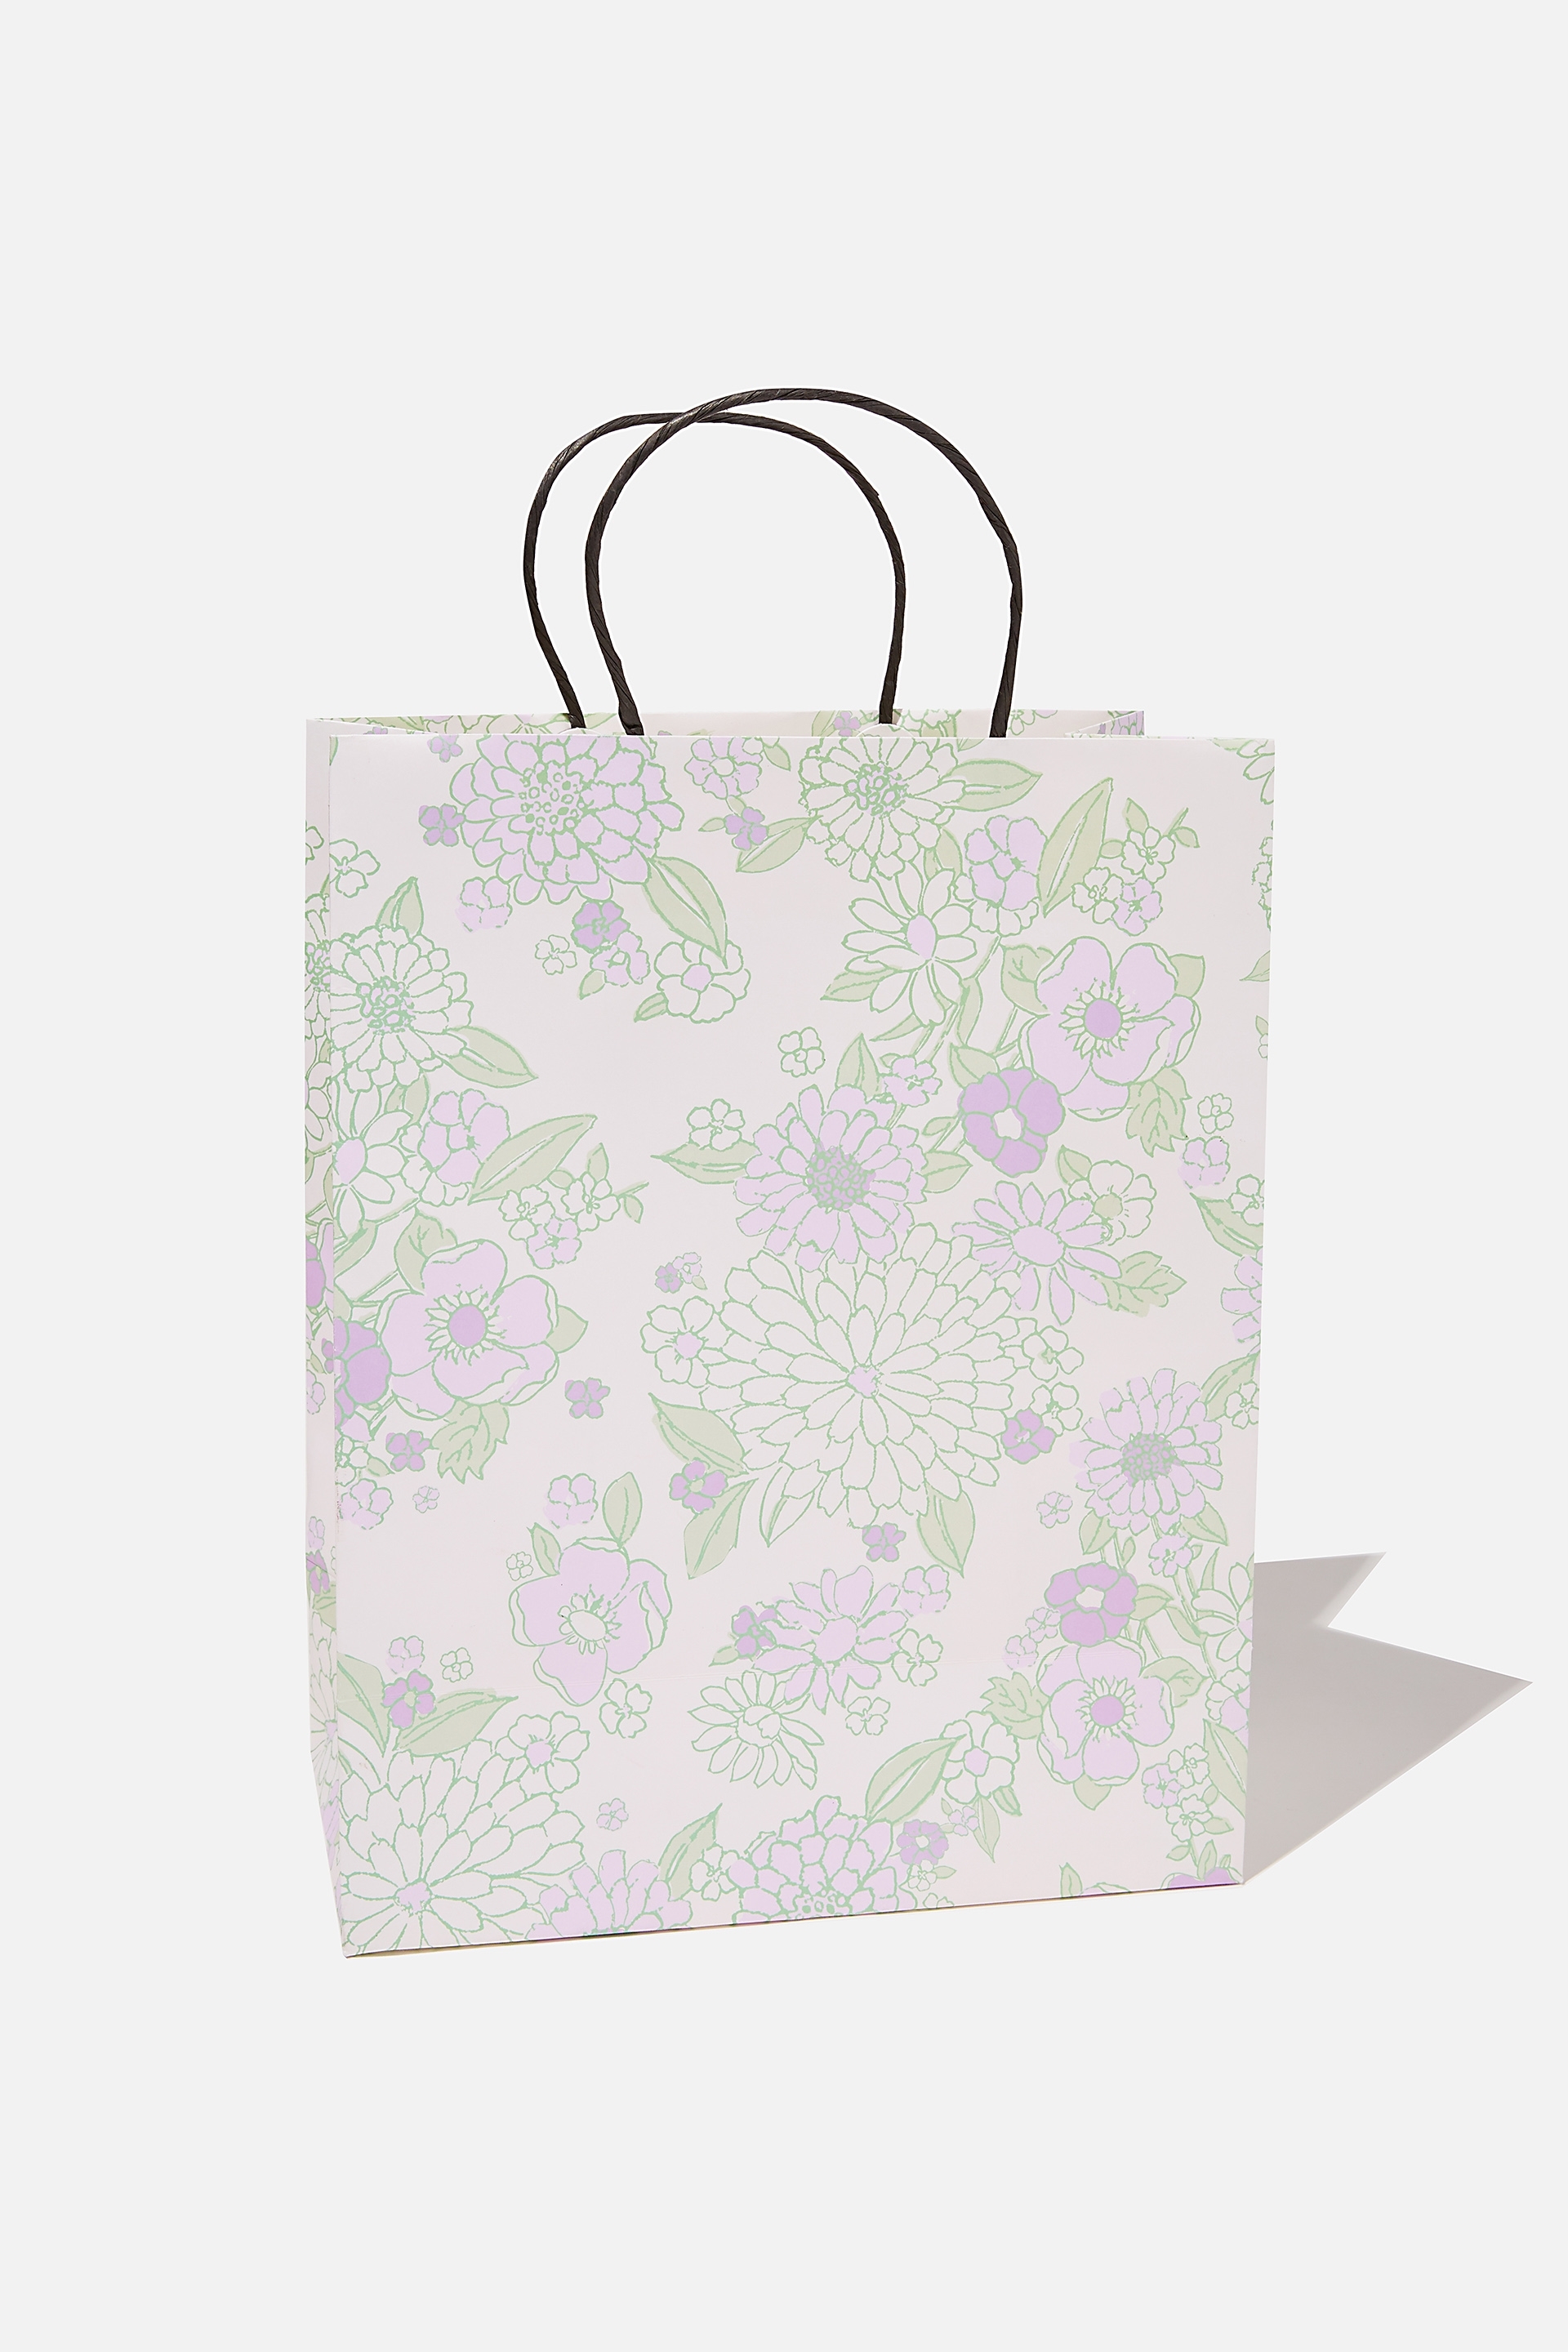 X2 Bags Just For You Floral Gift Bag Ditsy Floral Gift Bag medium